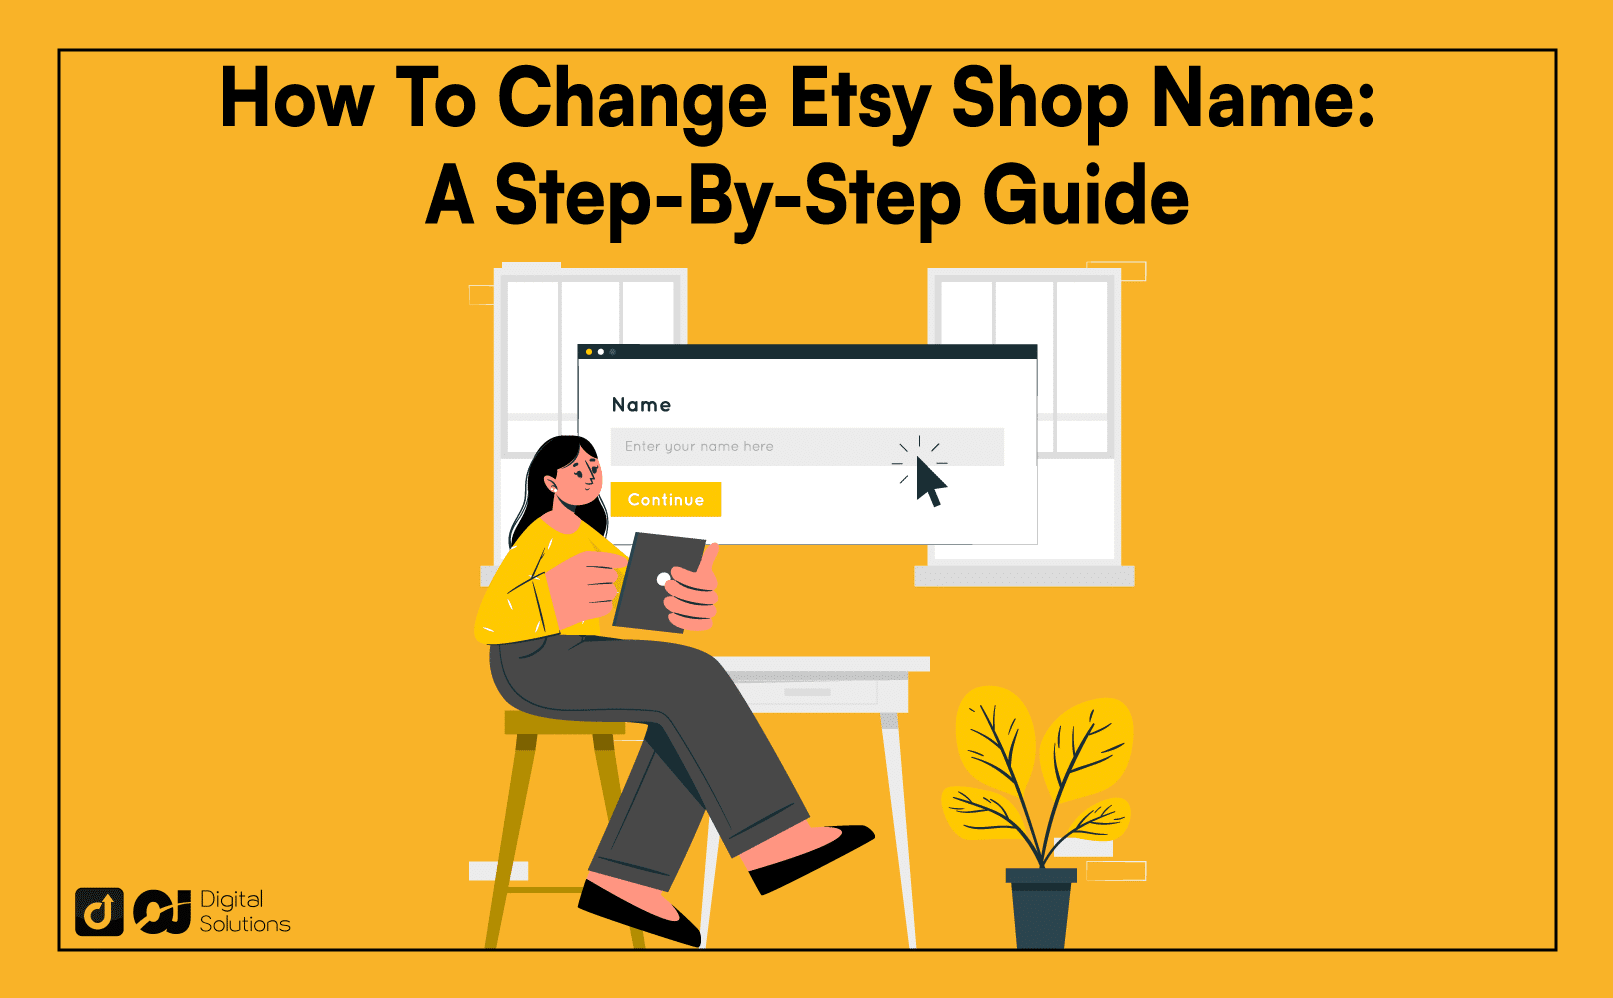 How To Change Etsy Shop Name